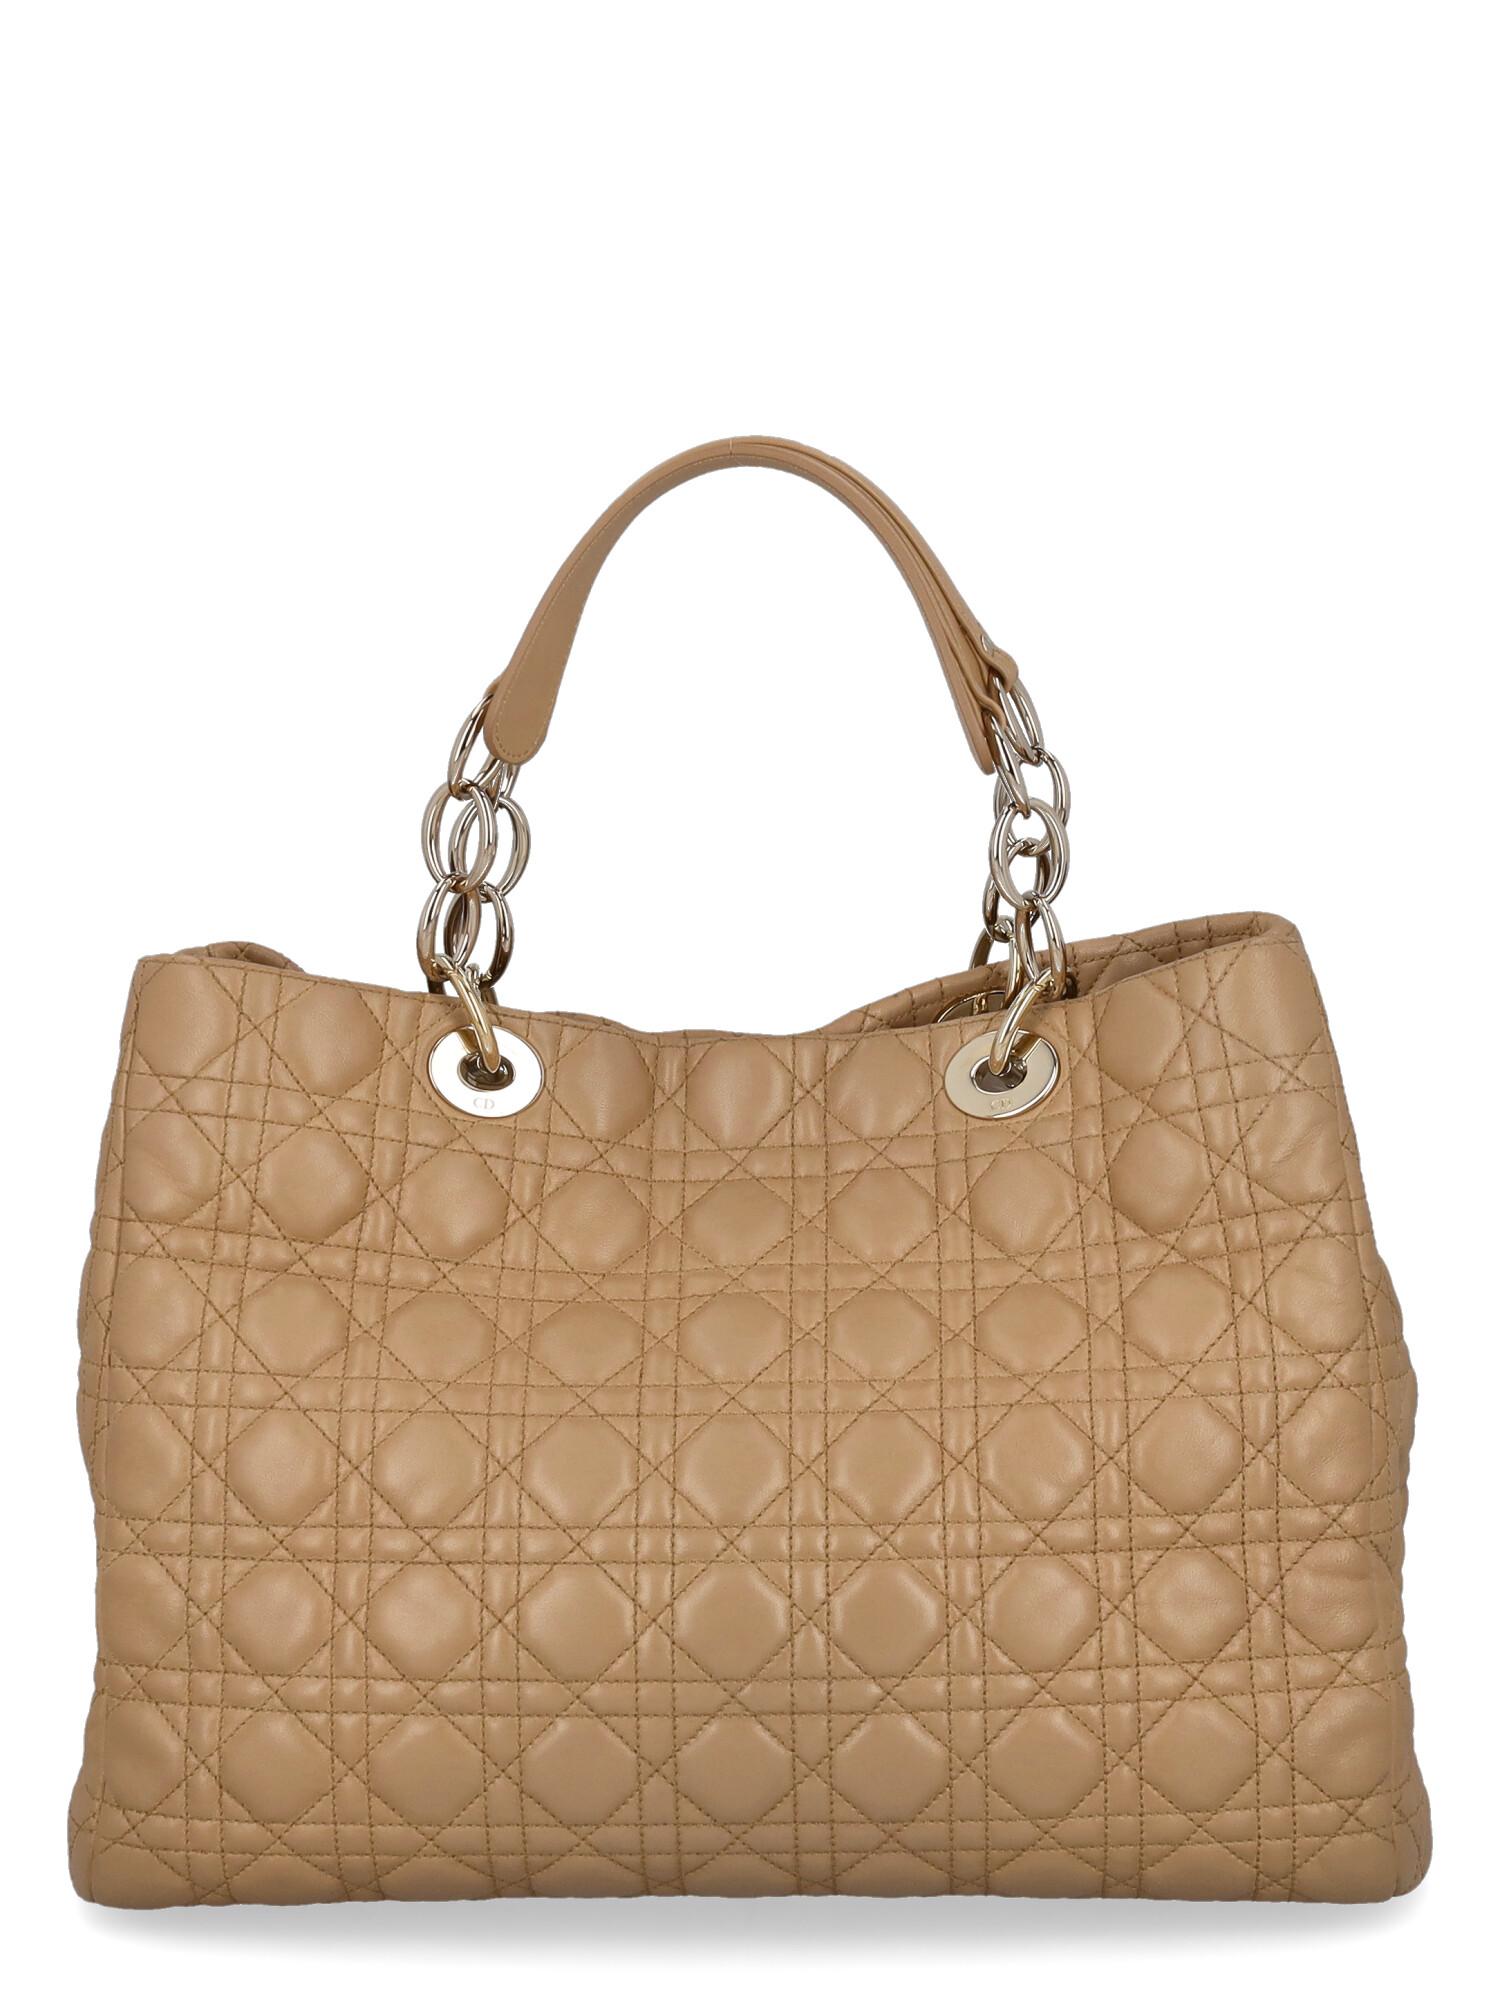 Dior Women Handbags Lady Dior Beige Leather  In Good Condition For Sale In Milan, IT